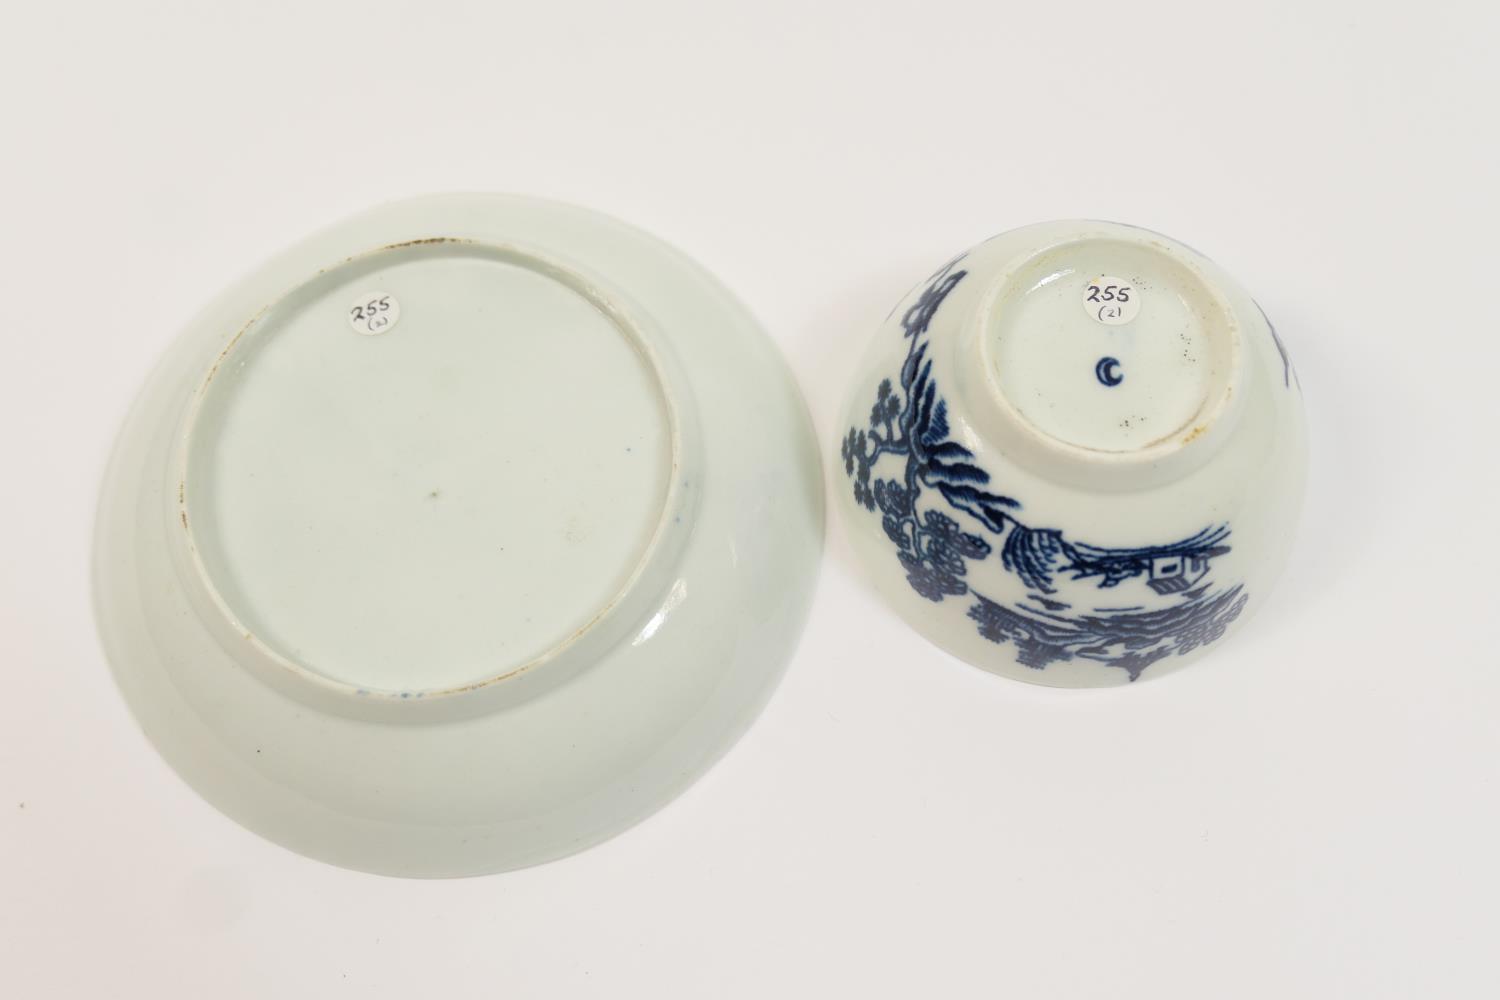 Worcester blue and white printed tea bowl and saucer, circa 1770, decorated with the Man in the - Image 2 of 2